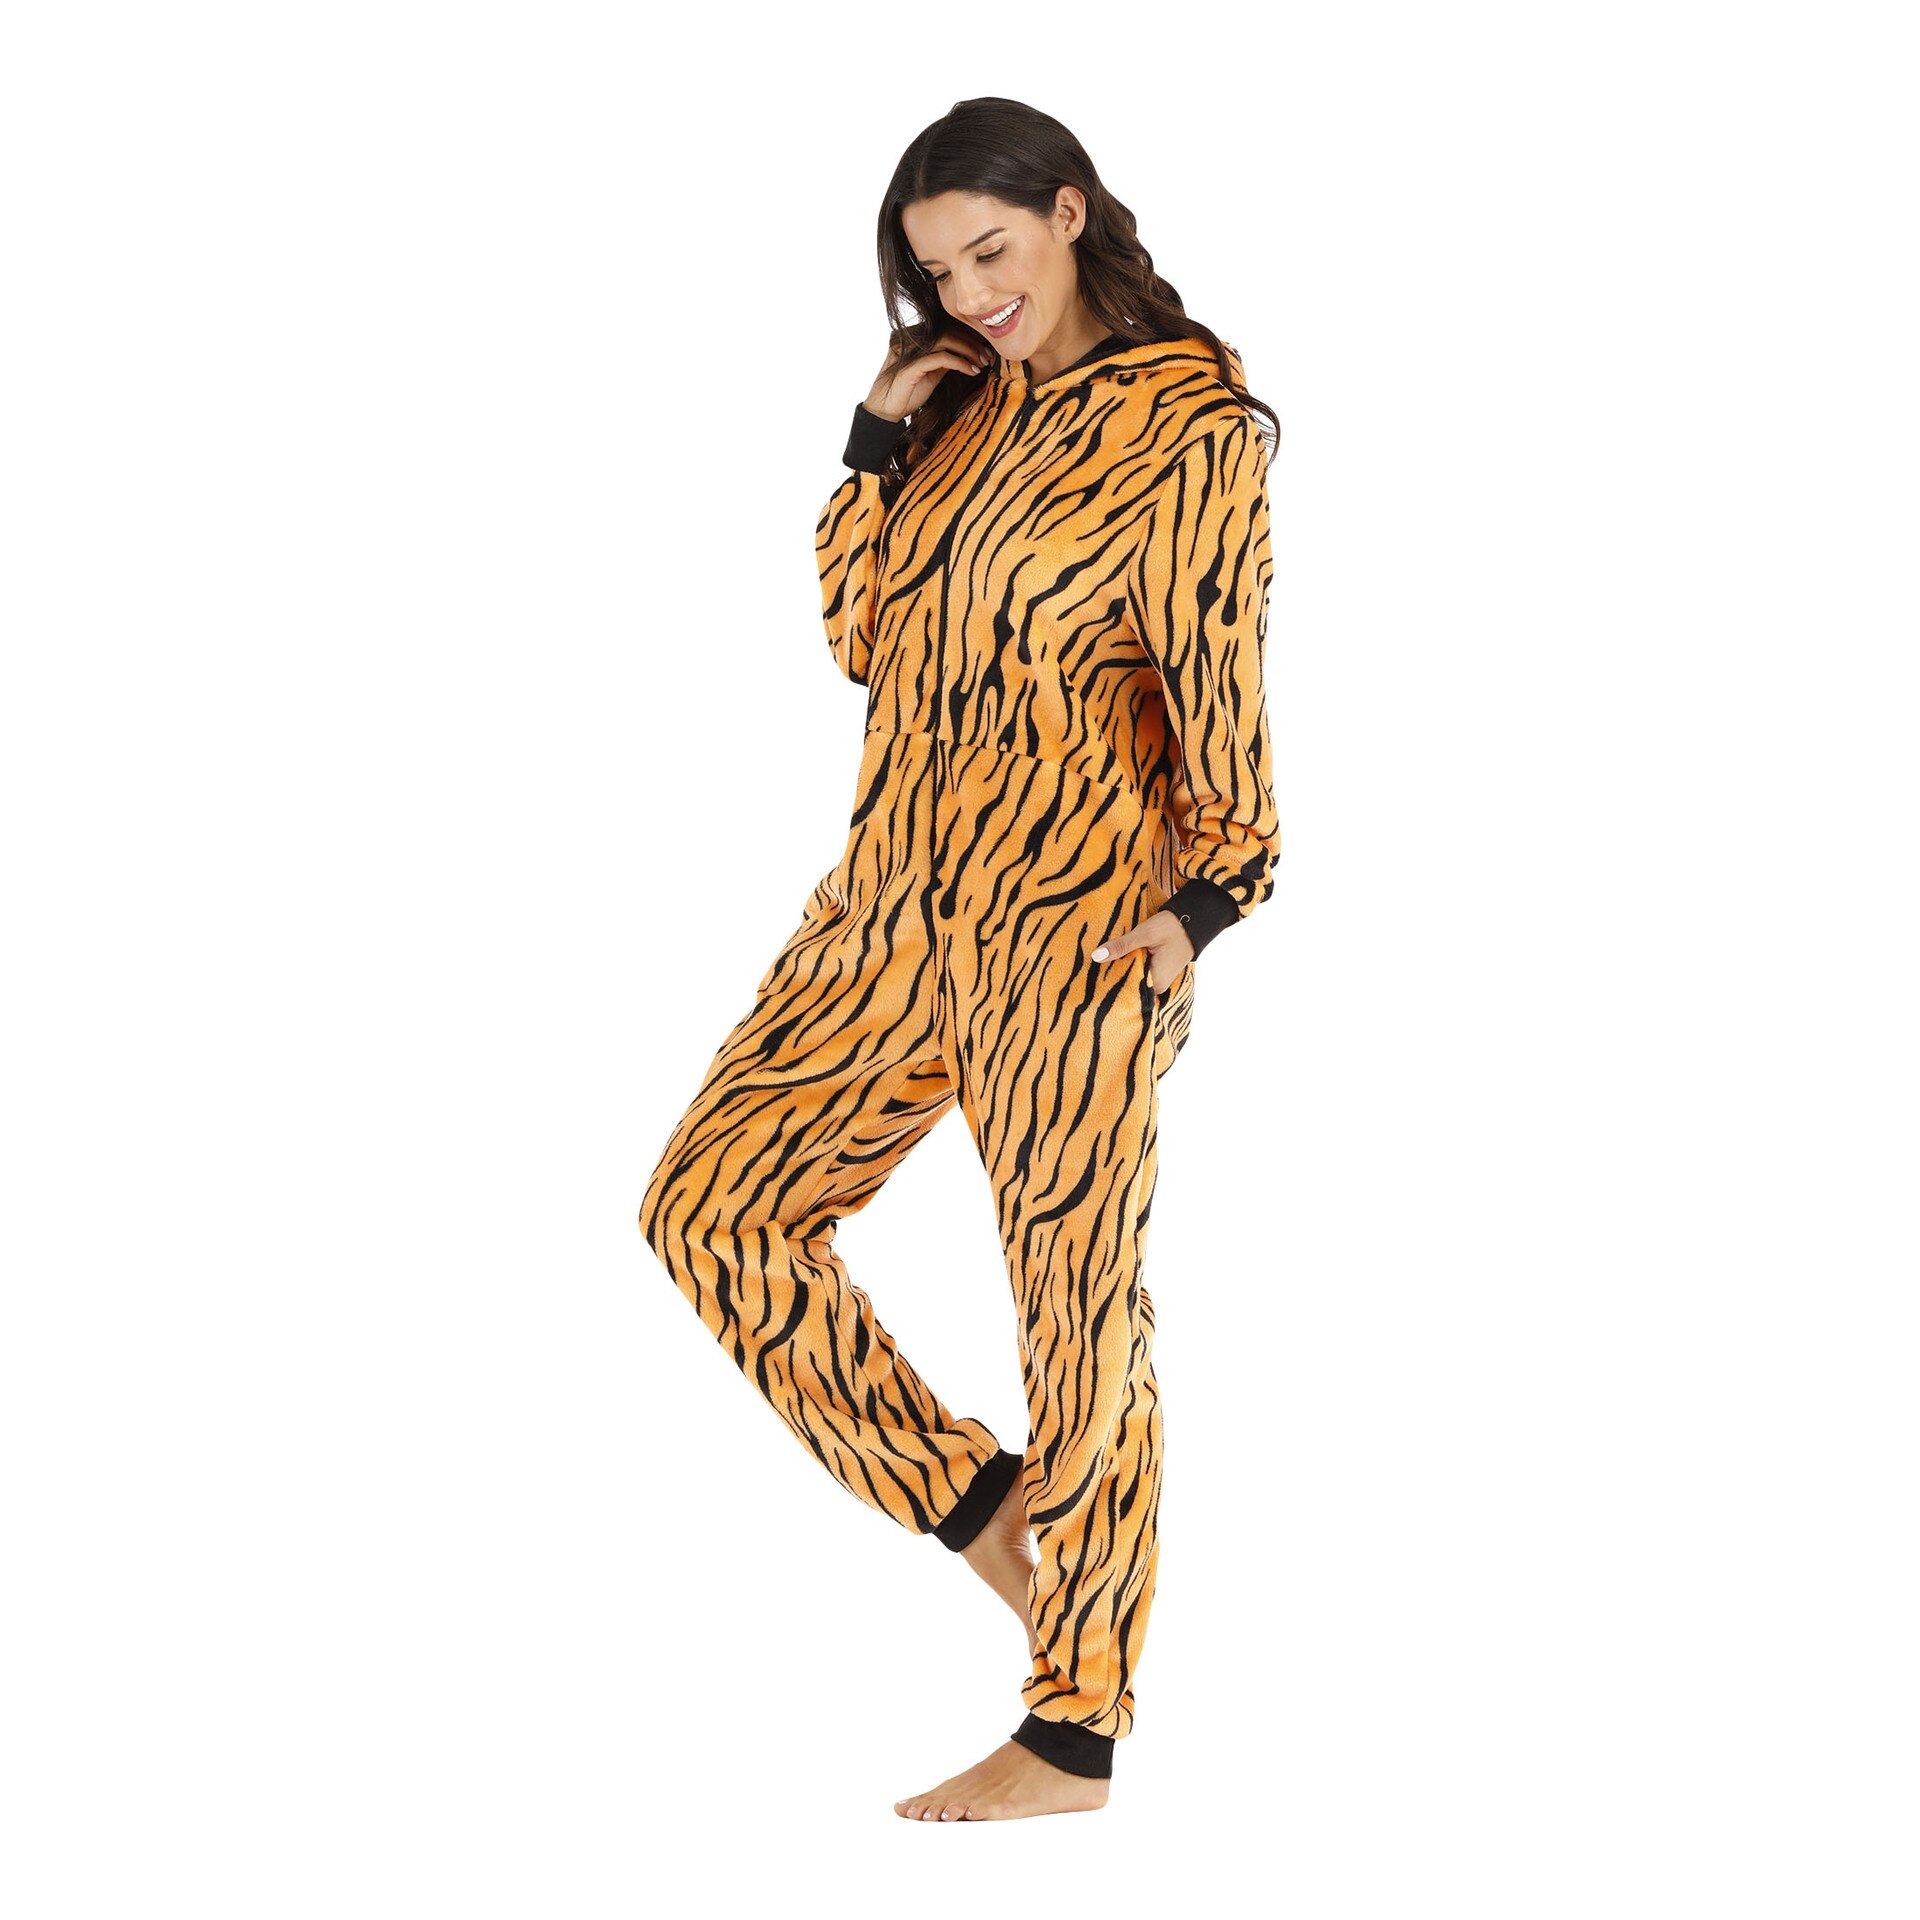 Leopard Jumpsuits Women Stitch Onesie Kingurumi Animal Costumes Adult Casual Festival Party Streetwear Coverall Hooded Pajamas